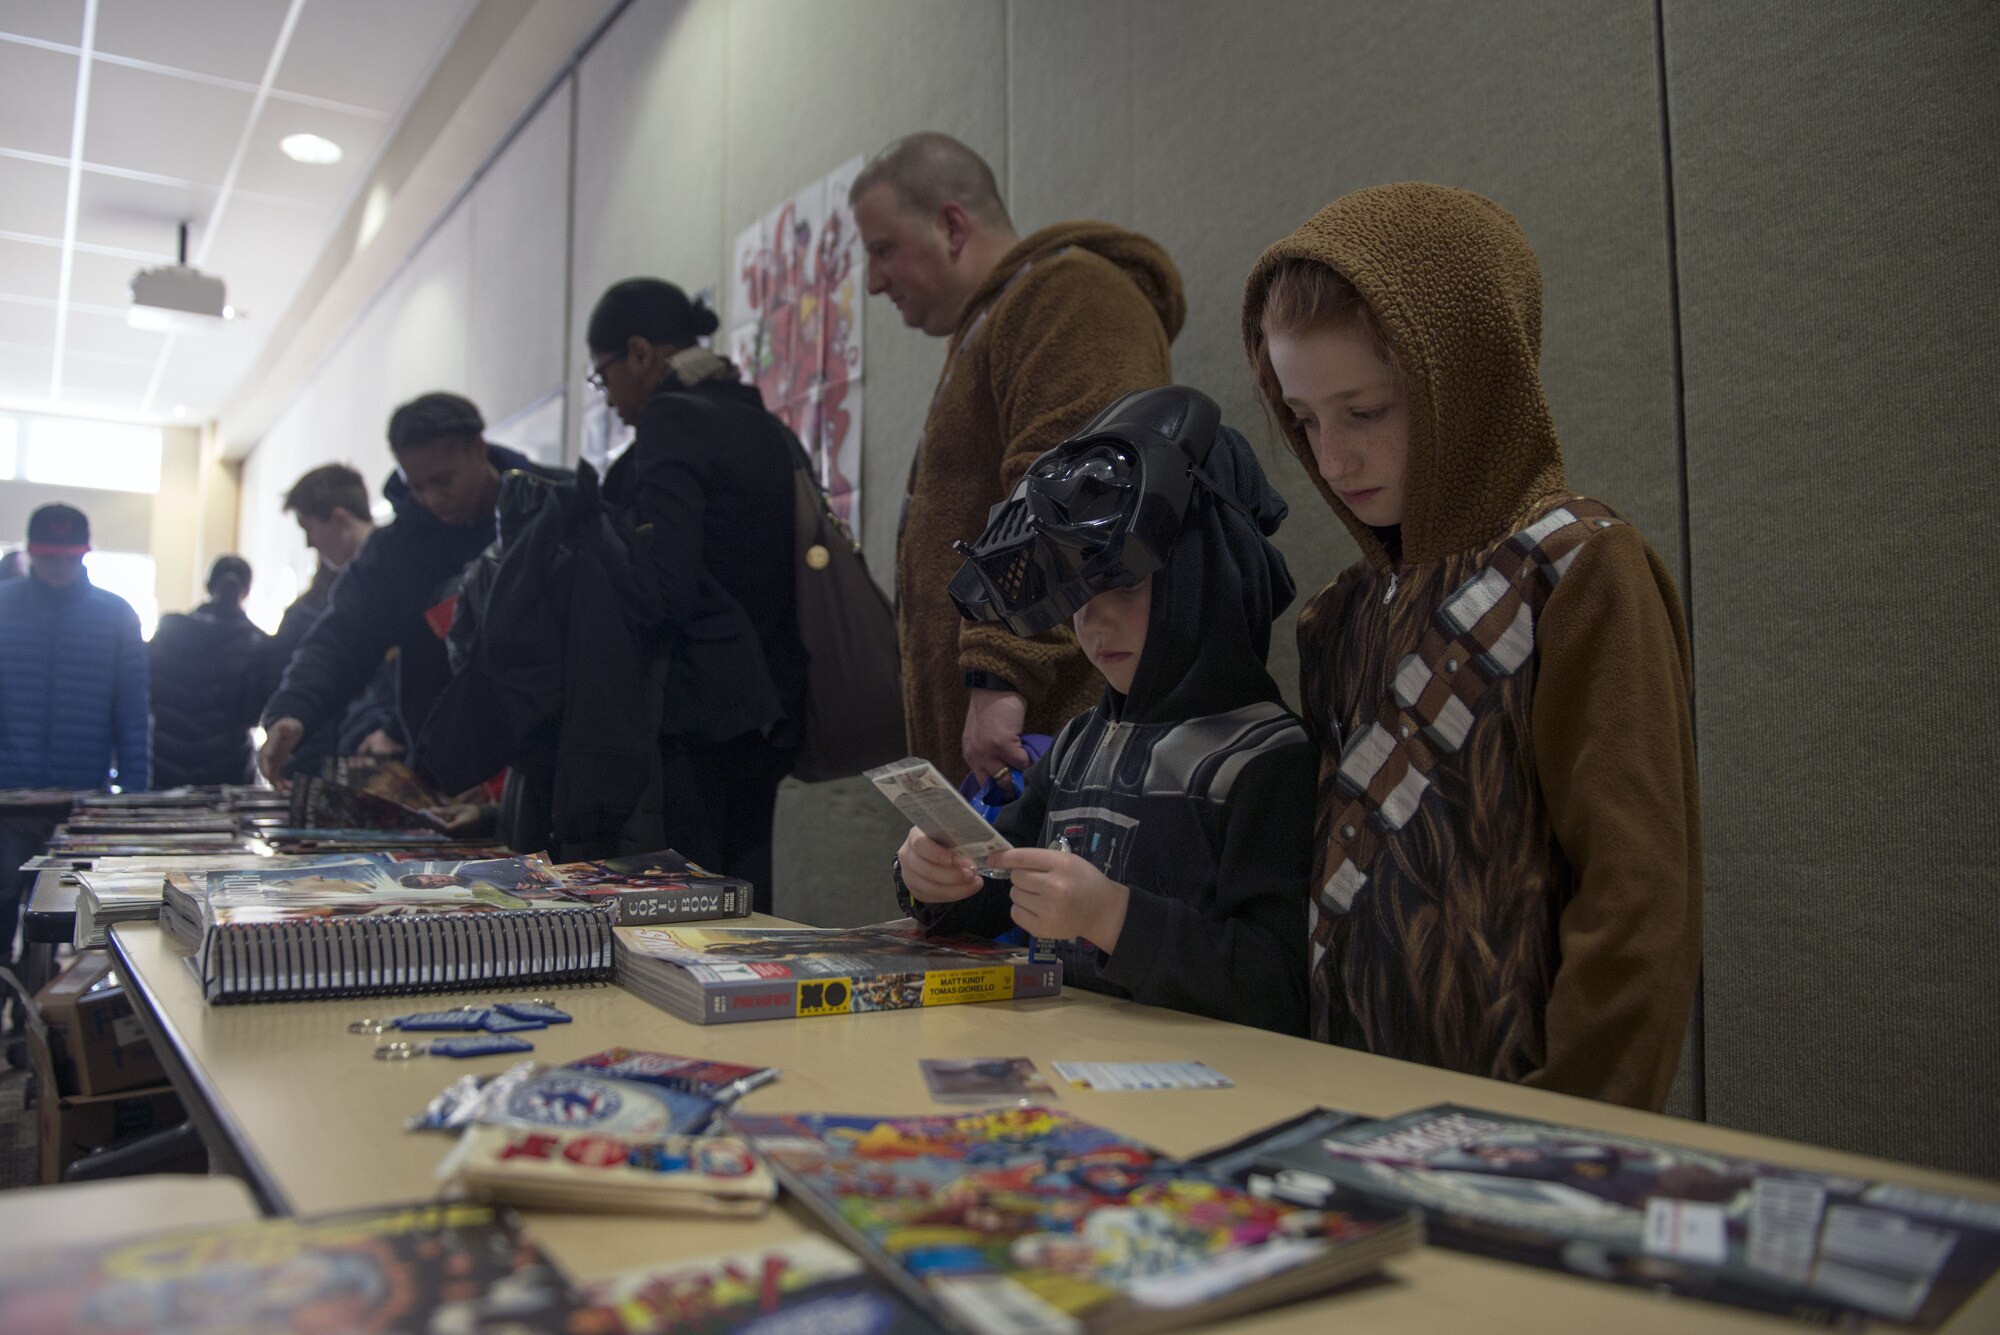 Families pick and choose two free single-issue comics from as old as the 1989 Gilgamesh II to 2015’s Paper Girls at the Joint Base Elmendorf-Richardson Library 4th Annual Comic Con, Jan. 27, 2018. The event included cosplay, a trivia contest, arts and crafts, and many more activities.